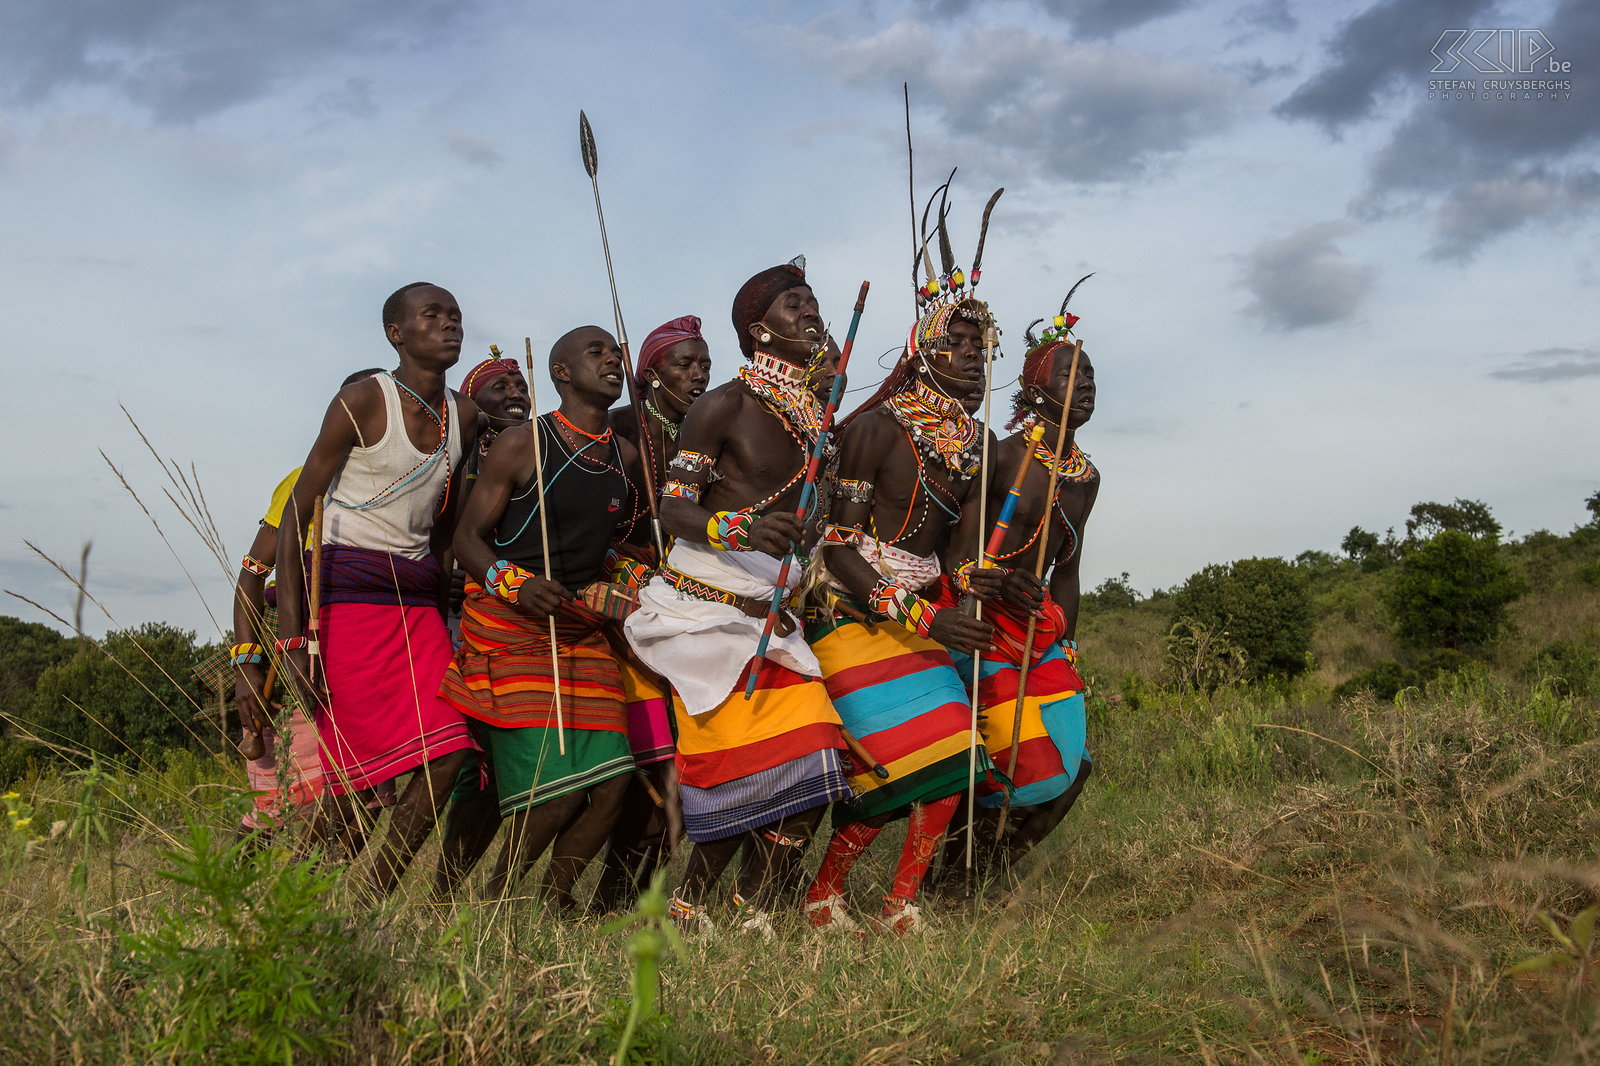 Suguta Marma - Dancing Samburu morans The warriors we invited, demonstrated their traditional dances with impressive high jumps. They sing, walk around and jump up from a standing position. A fascinating spectacle. Stefan Cruysberghs